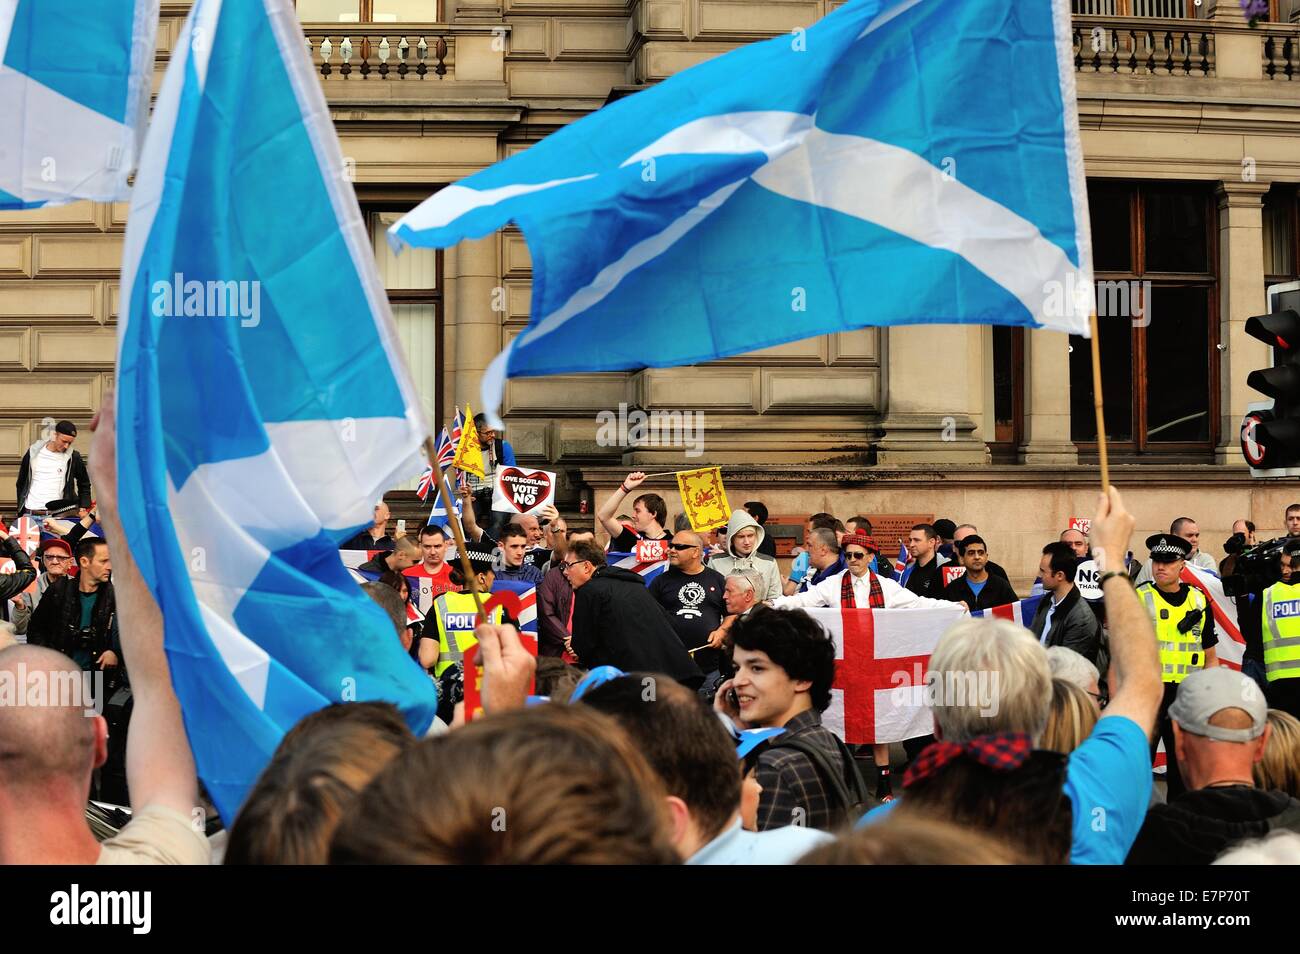 Crowds gather in George Square for pro-independence rally. Protest by Unionists/Loyalists leading to stand off. Stock Photo